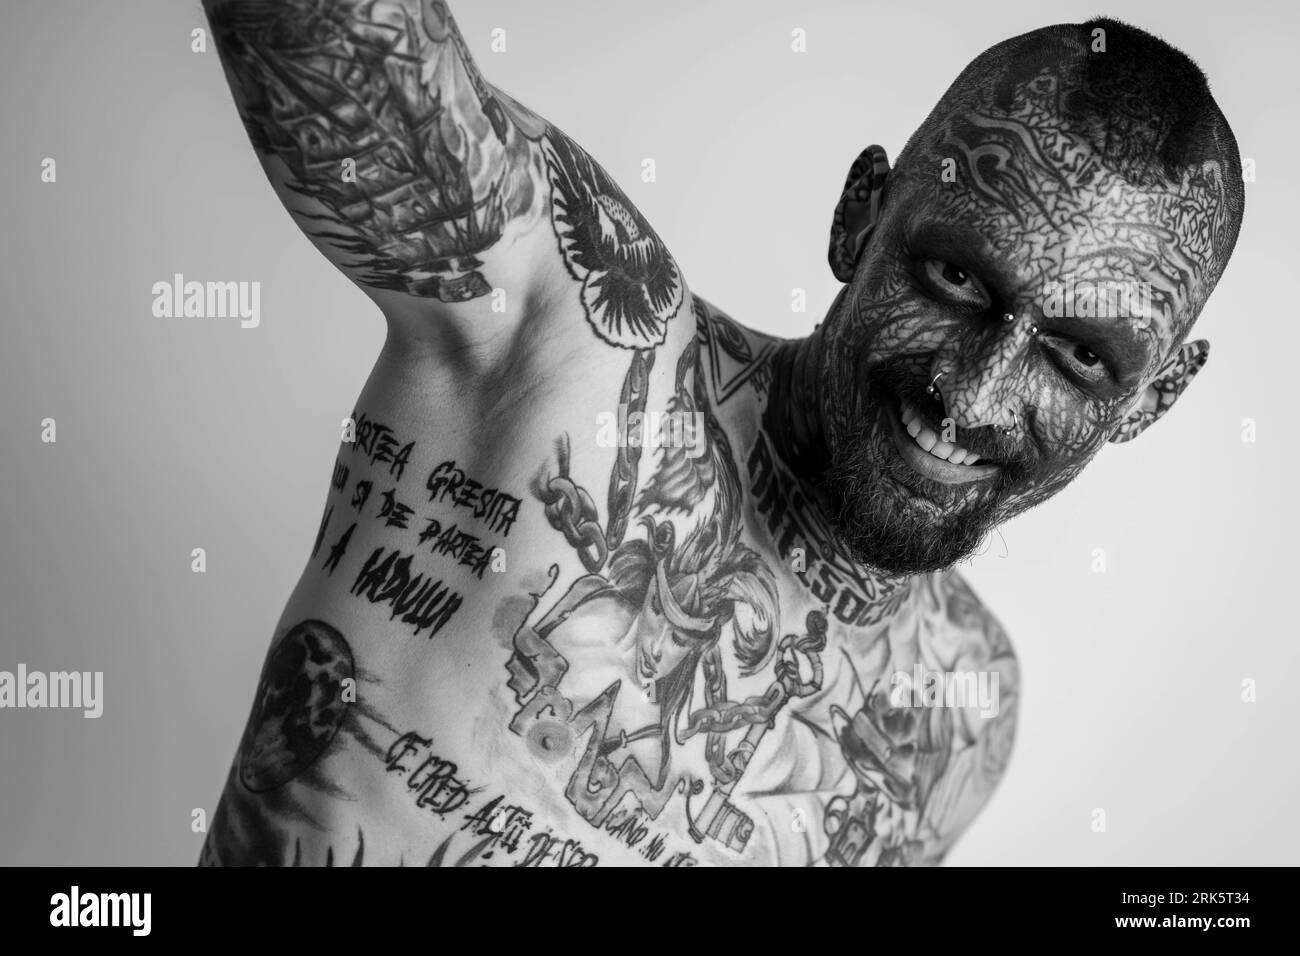 A portrait of a Caucasian man with full body coverage of traditional tattoos standing against a white background Stock Photo